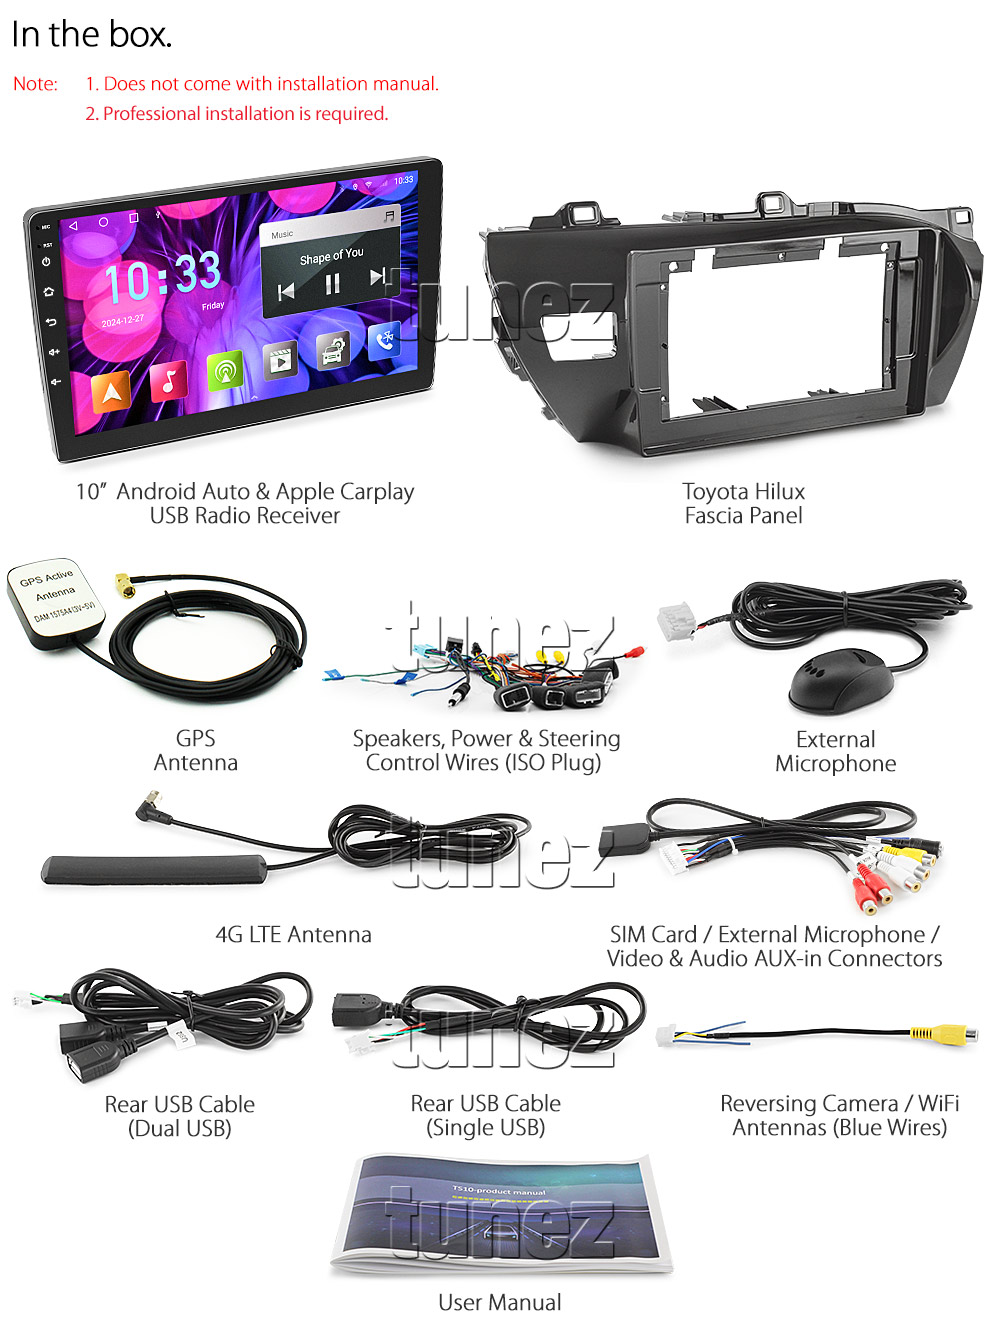 SRRTH01AND GPS Aftermarket Toyota Hilux 2015 2016 2017 2018 2019 2020 2021 SR SR5 Workmate Rogue Rugged X chassis 8th generation gen GUN1 AN120 AN130 10-inch touchscreen Universal Double DIN Latest Australia UK European USA Apple CarPlay Android Auto 10 Car USB player radio stereo 4G LTE WiFi head unit details Aftermarket External and Internal Microphone Bluetooth Europe Sat Nav Navi Plug and Play ISO Plug Wiring Harness Matching Fascia Kit Facia Free Reversing Camera Album Art ID3 Tag RMVB MP3 MP4 AVI MKV Full High Definition FHD 1080p DAB+ Digital Radio DAB + Connects2 CTSIZ001.2